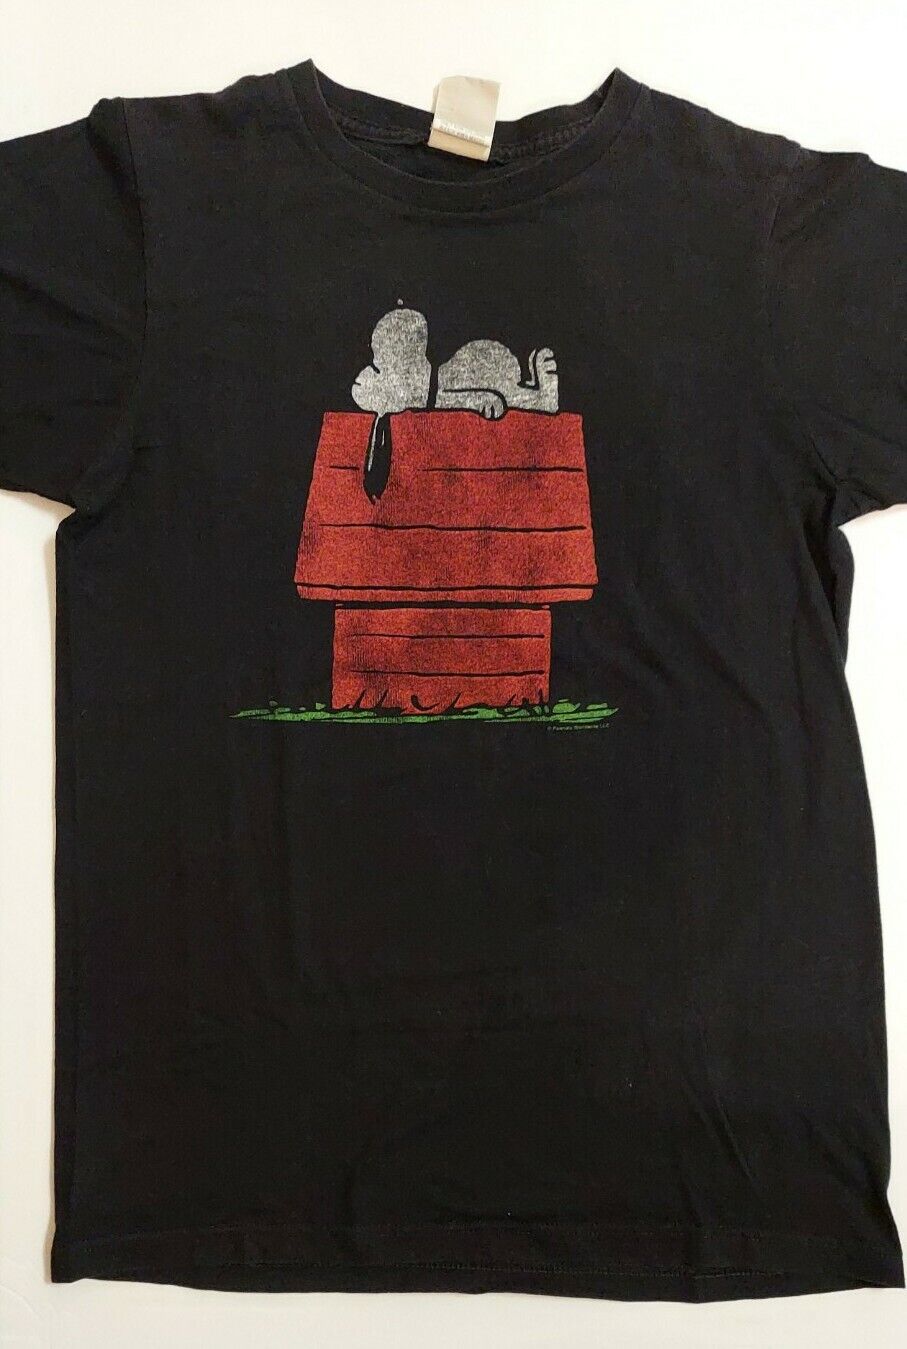 Vintage - Junk Food Label - Peanuts SNOOPY on Dog House Black T-Shirt size Small